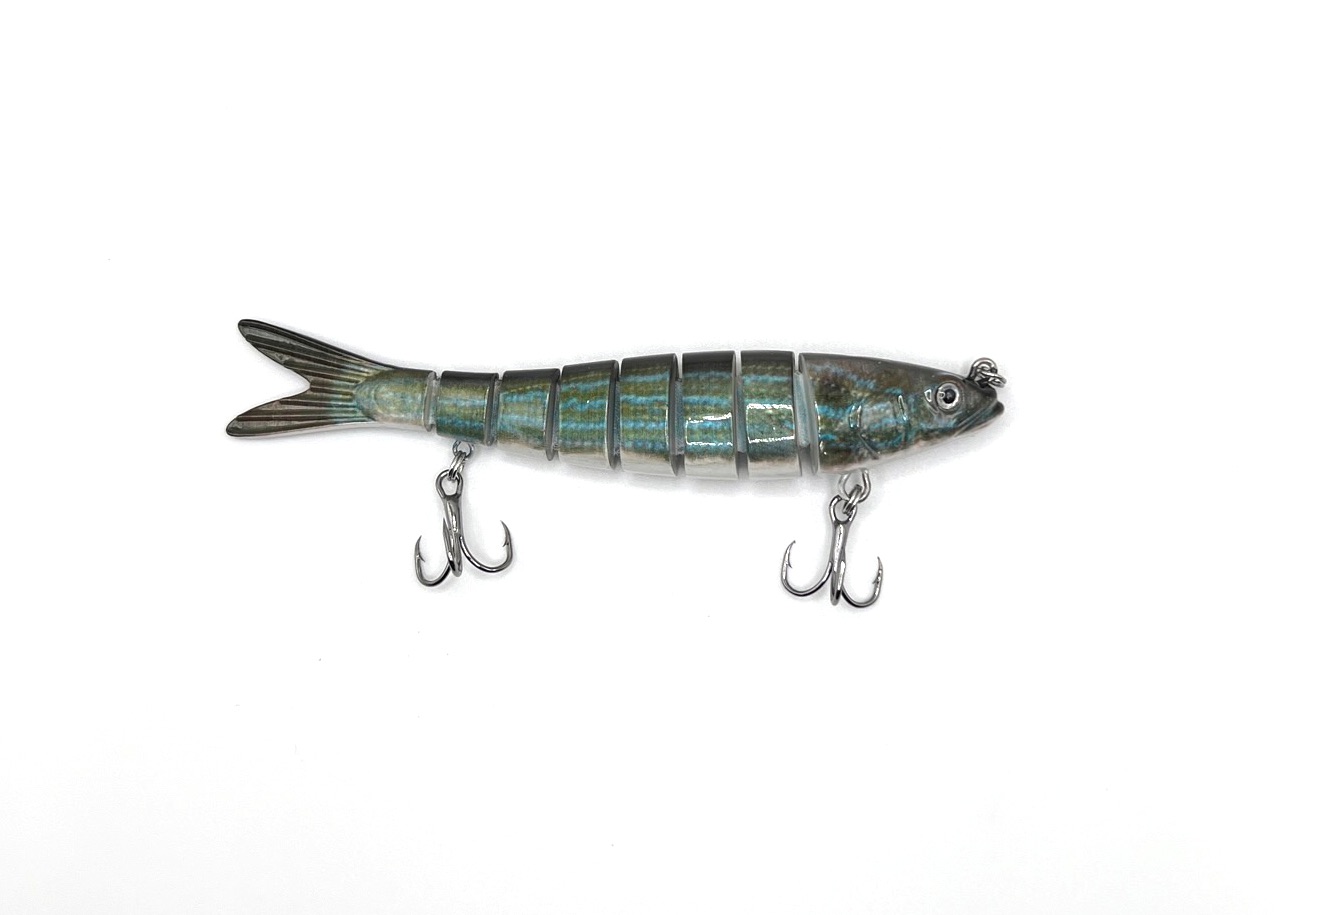 Realistic Segmented Fishing Lure For Freshwater Saltwater Bass Trout